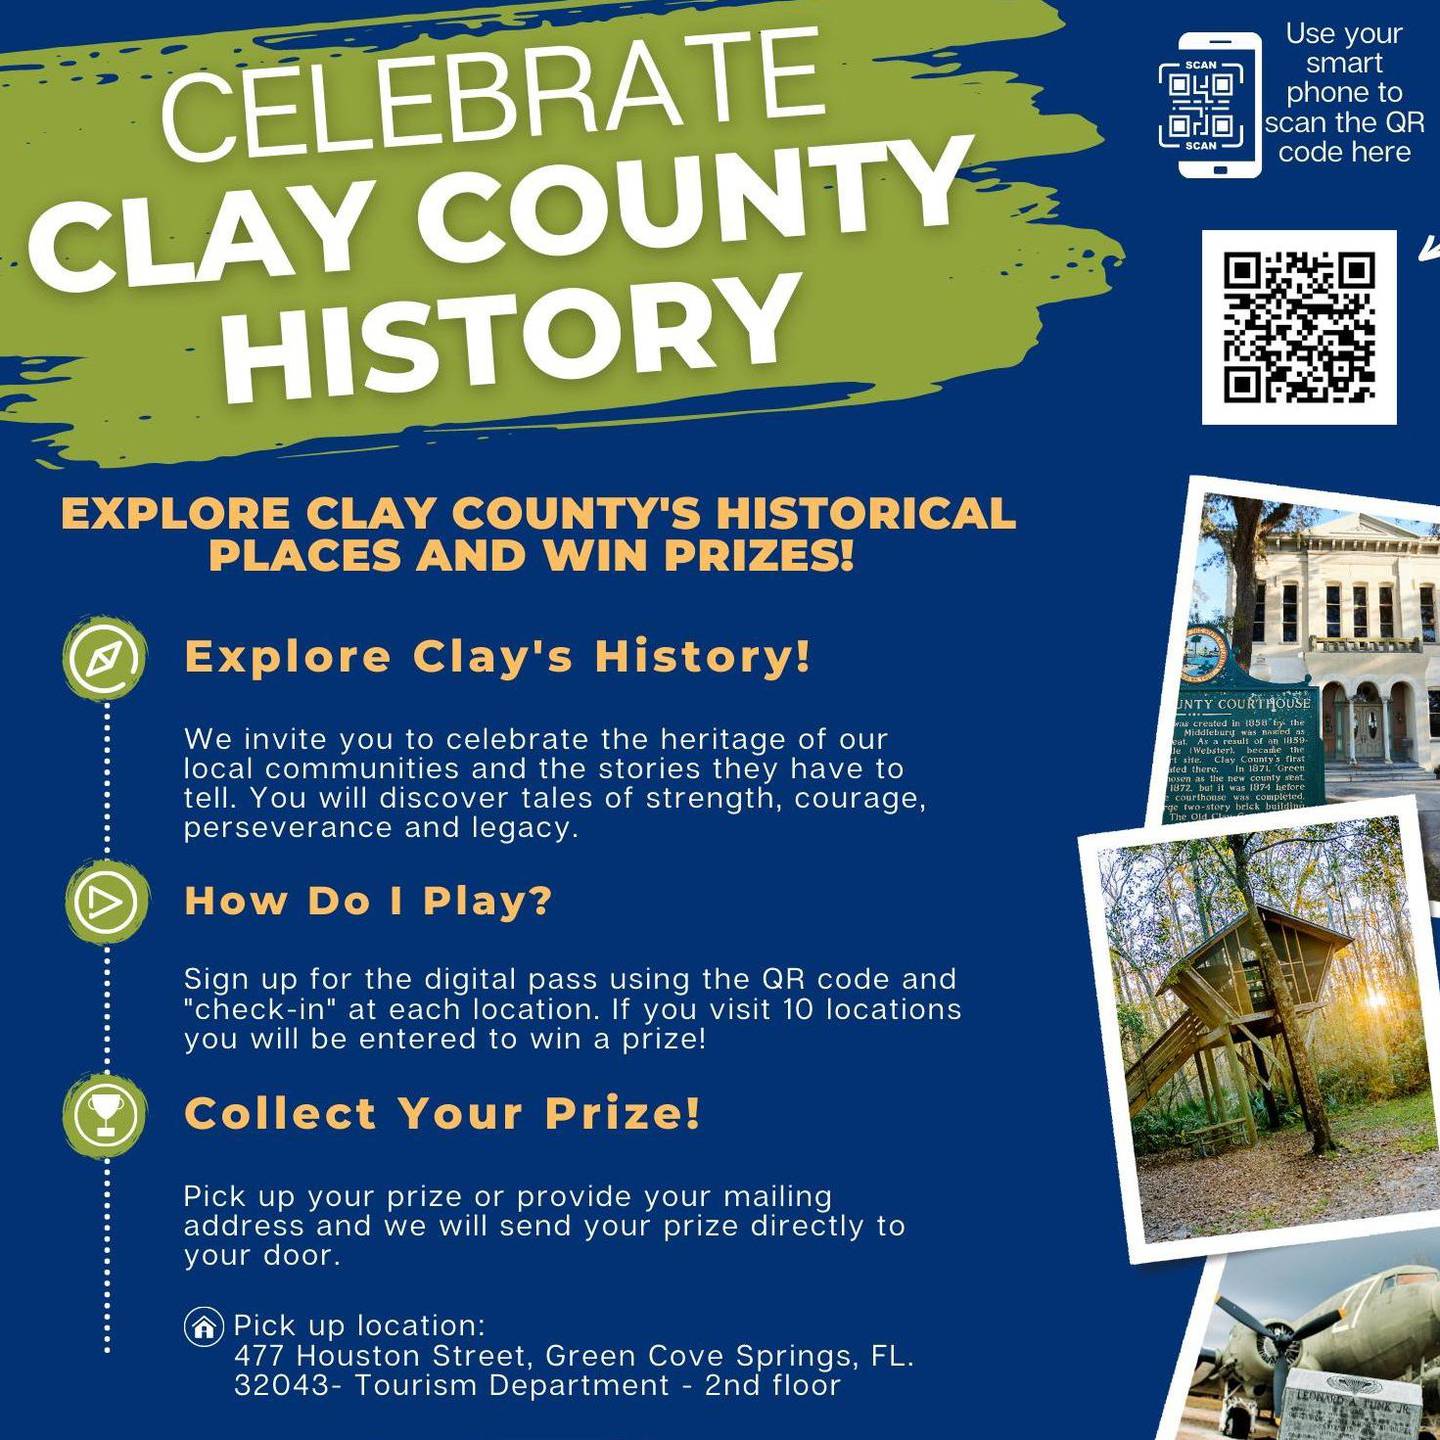 Explore Clay's history and win prizes.